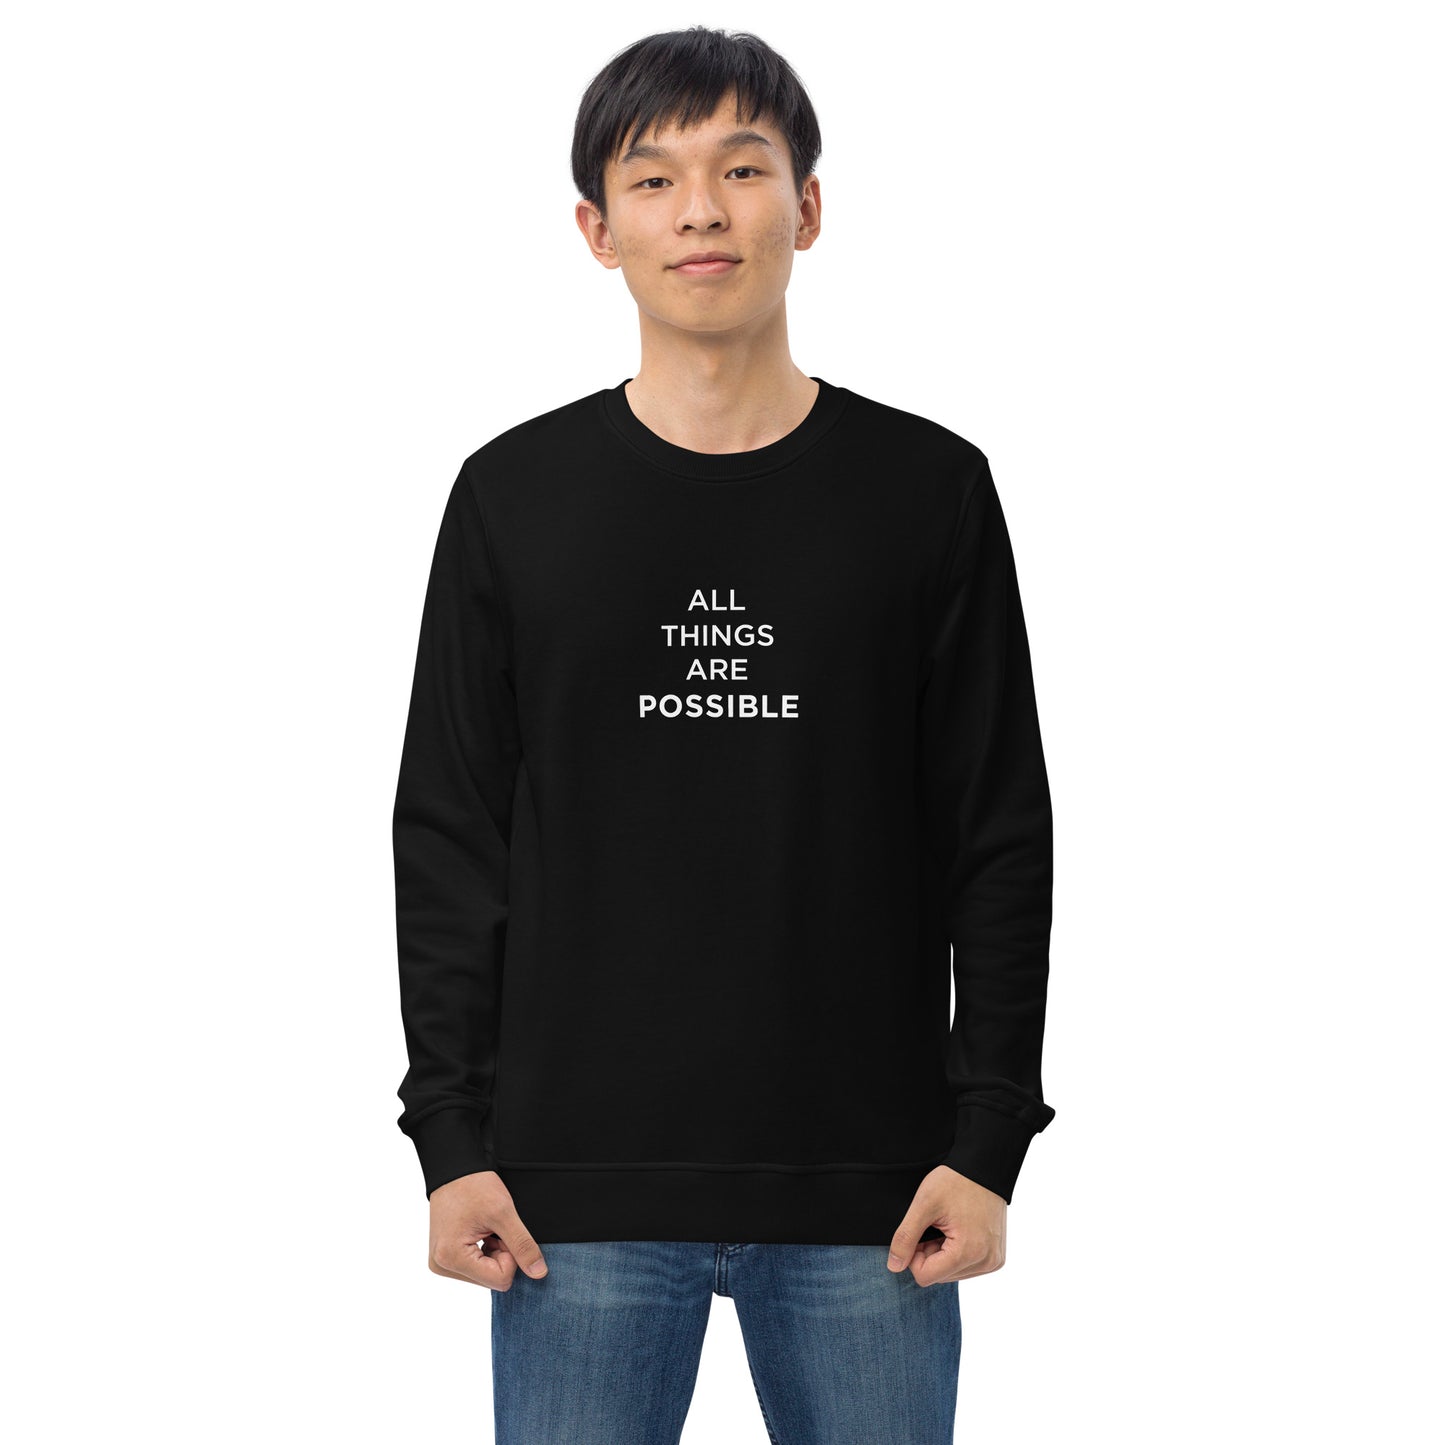 All Things Are Possible Men's Organic Cotton Sweatshirt